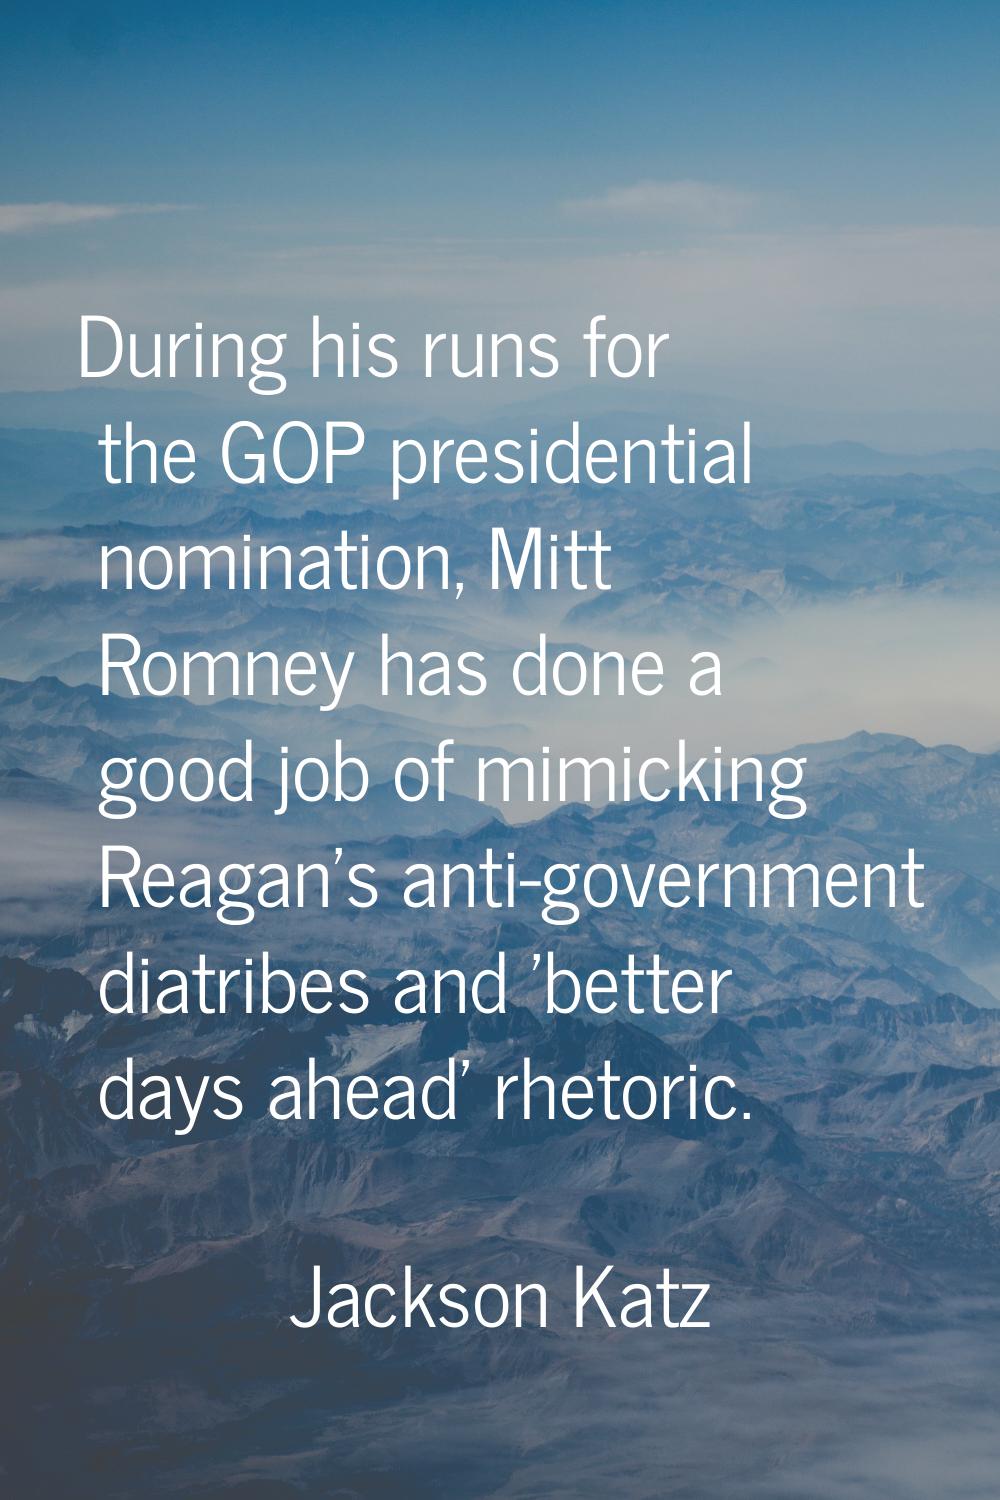 During his runs for the GOP presidential nomination, Mitt Romney has done a good job of mimicking R